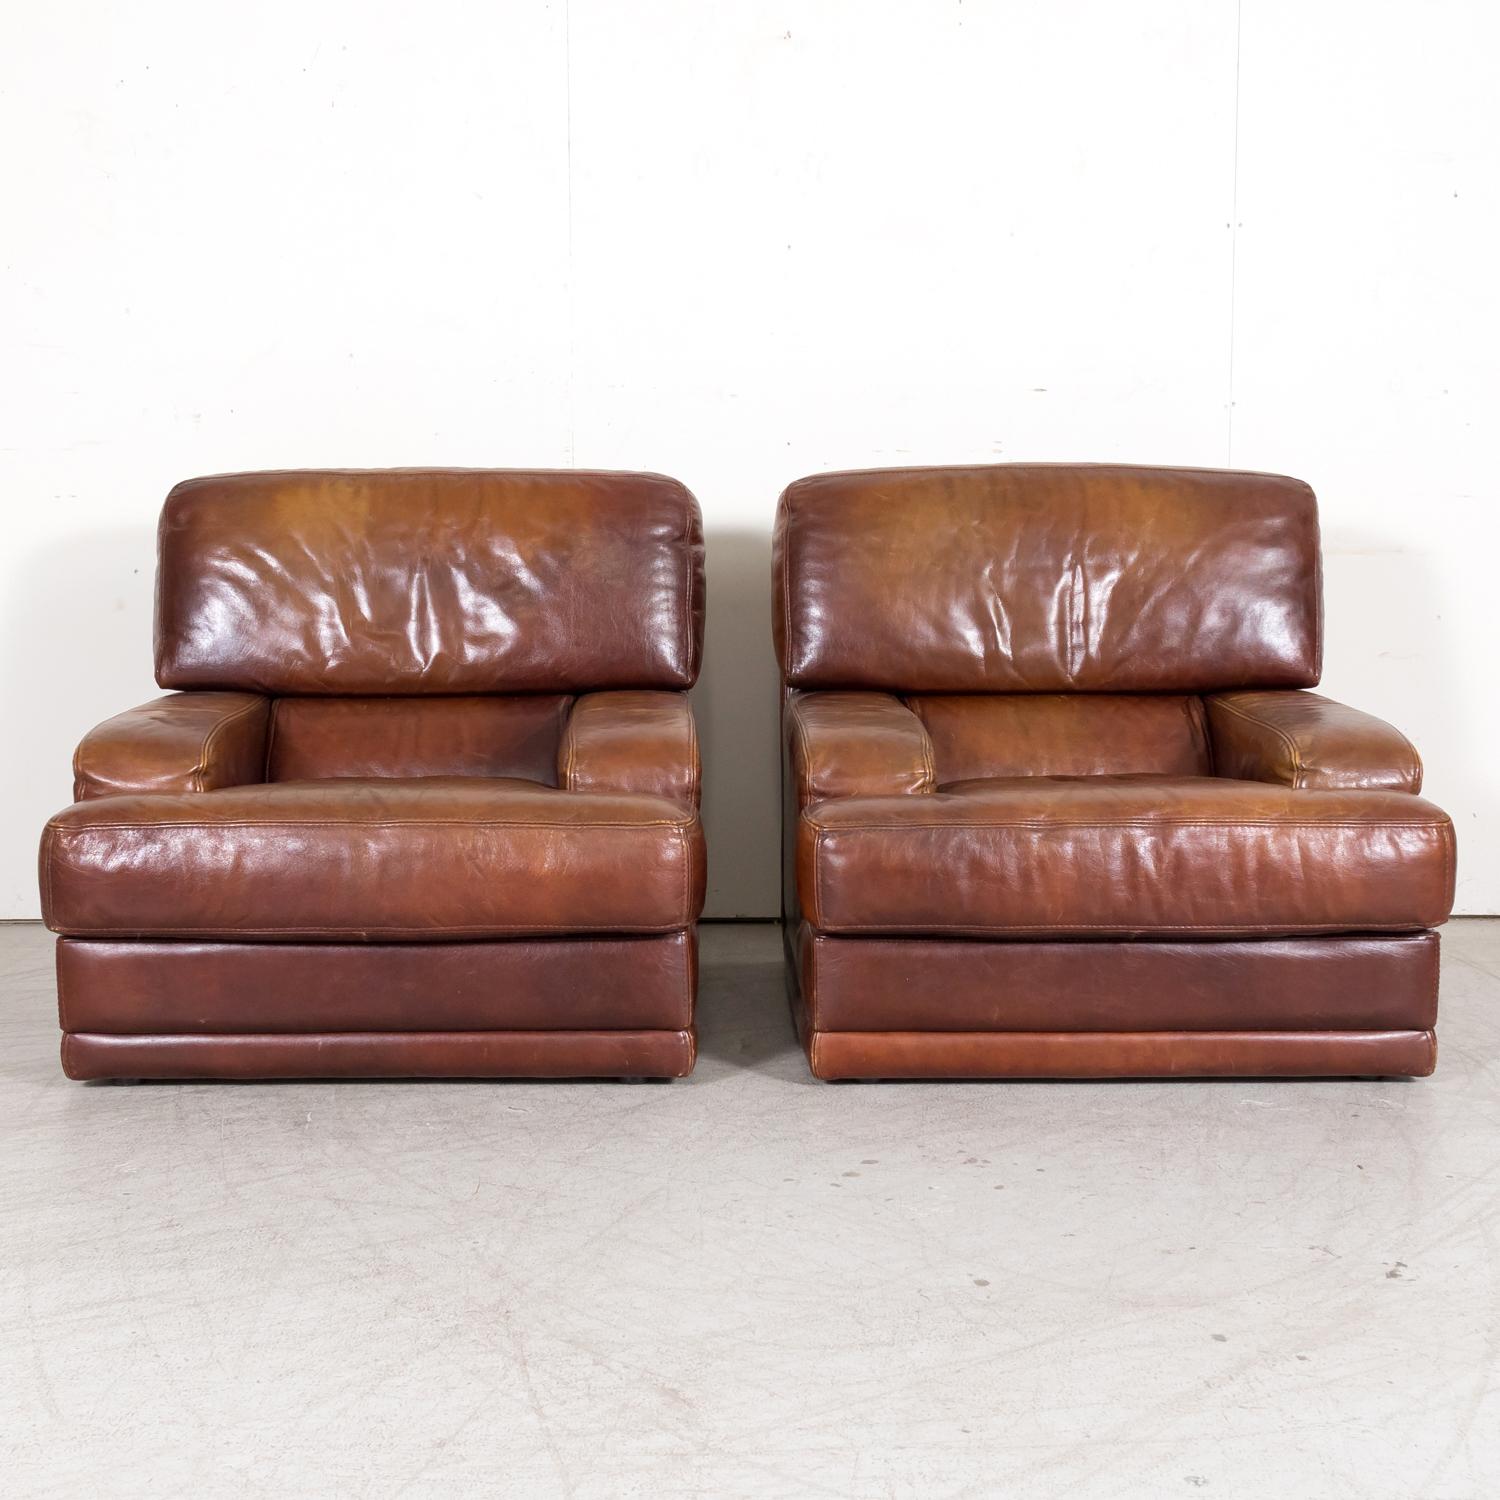 A pair of late 20th century mid-century modern French oversized patinated cognac leather lounge chairs, circa 1970s. These fabulous vintage leather armchairs, with their contemporary lines, are making serious function out of fashion! Both stylish